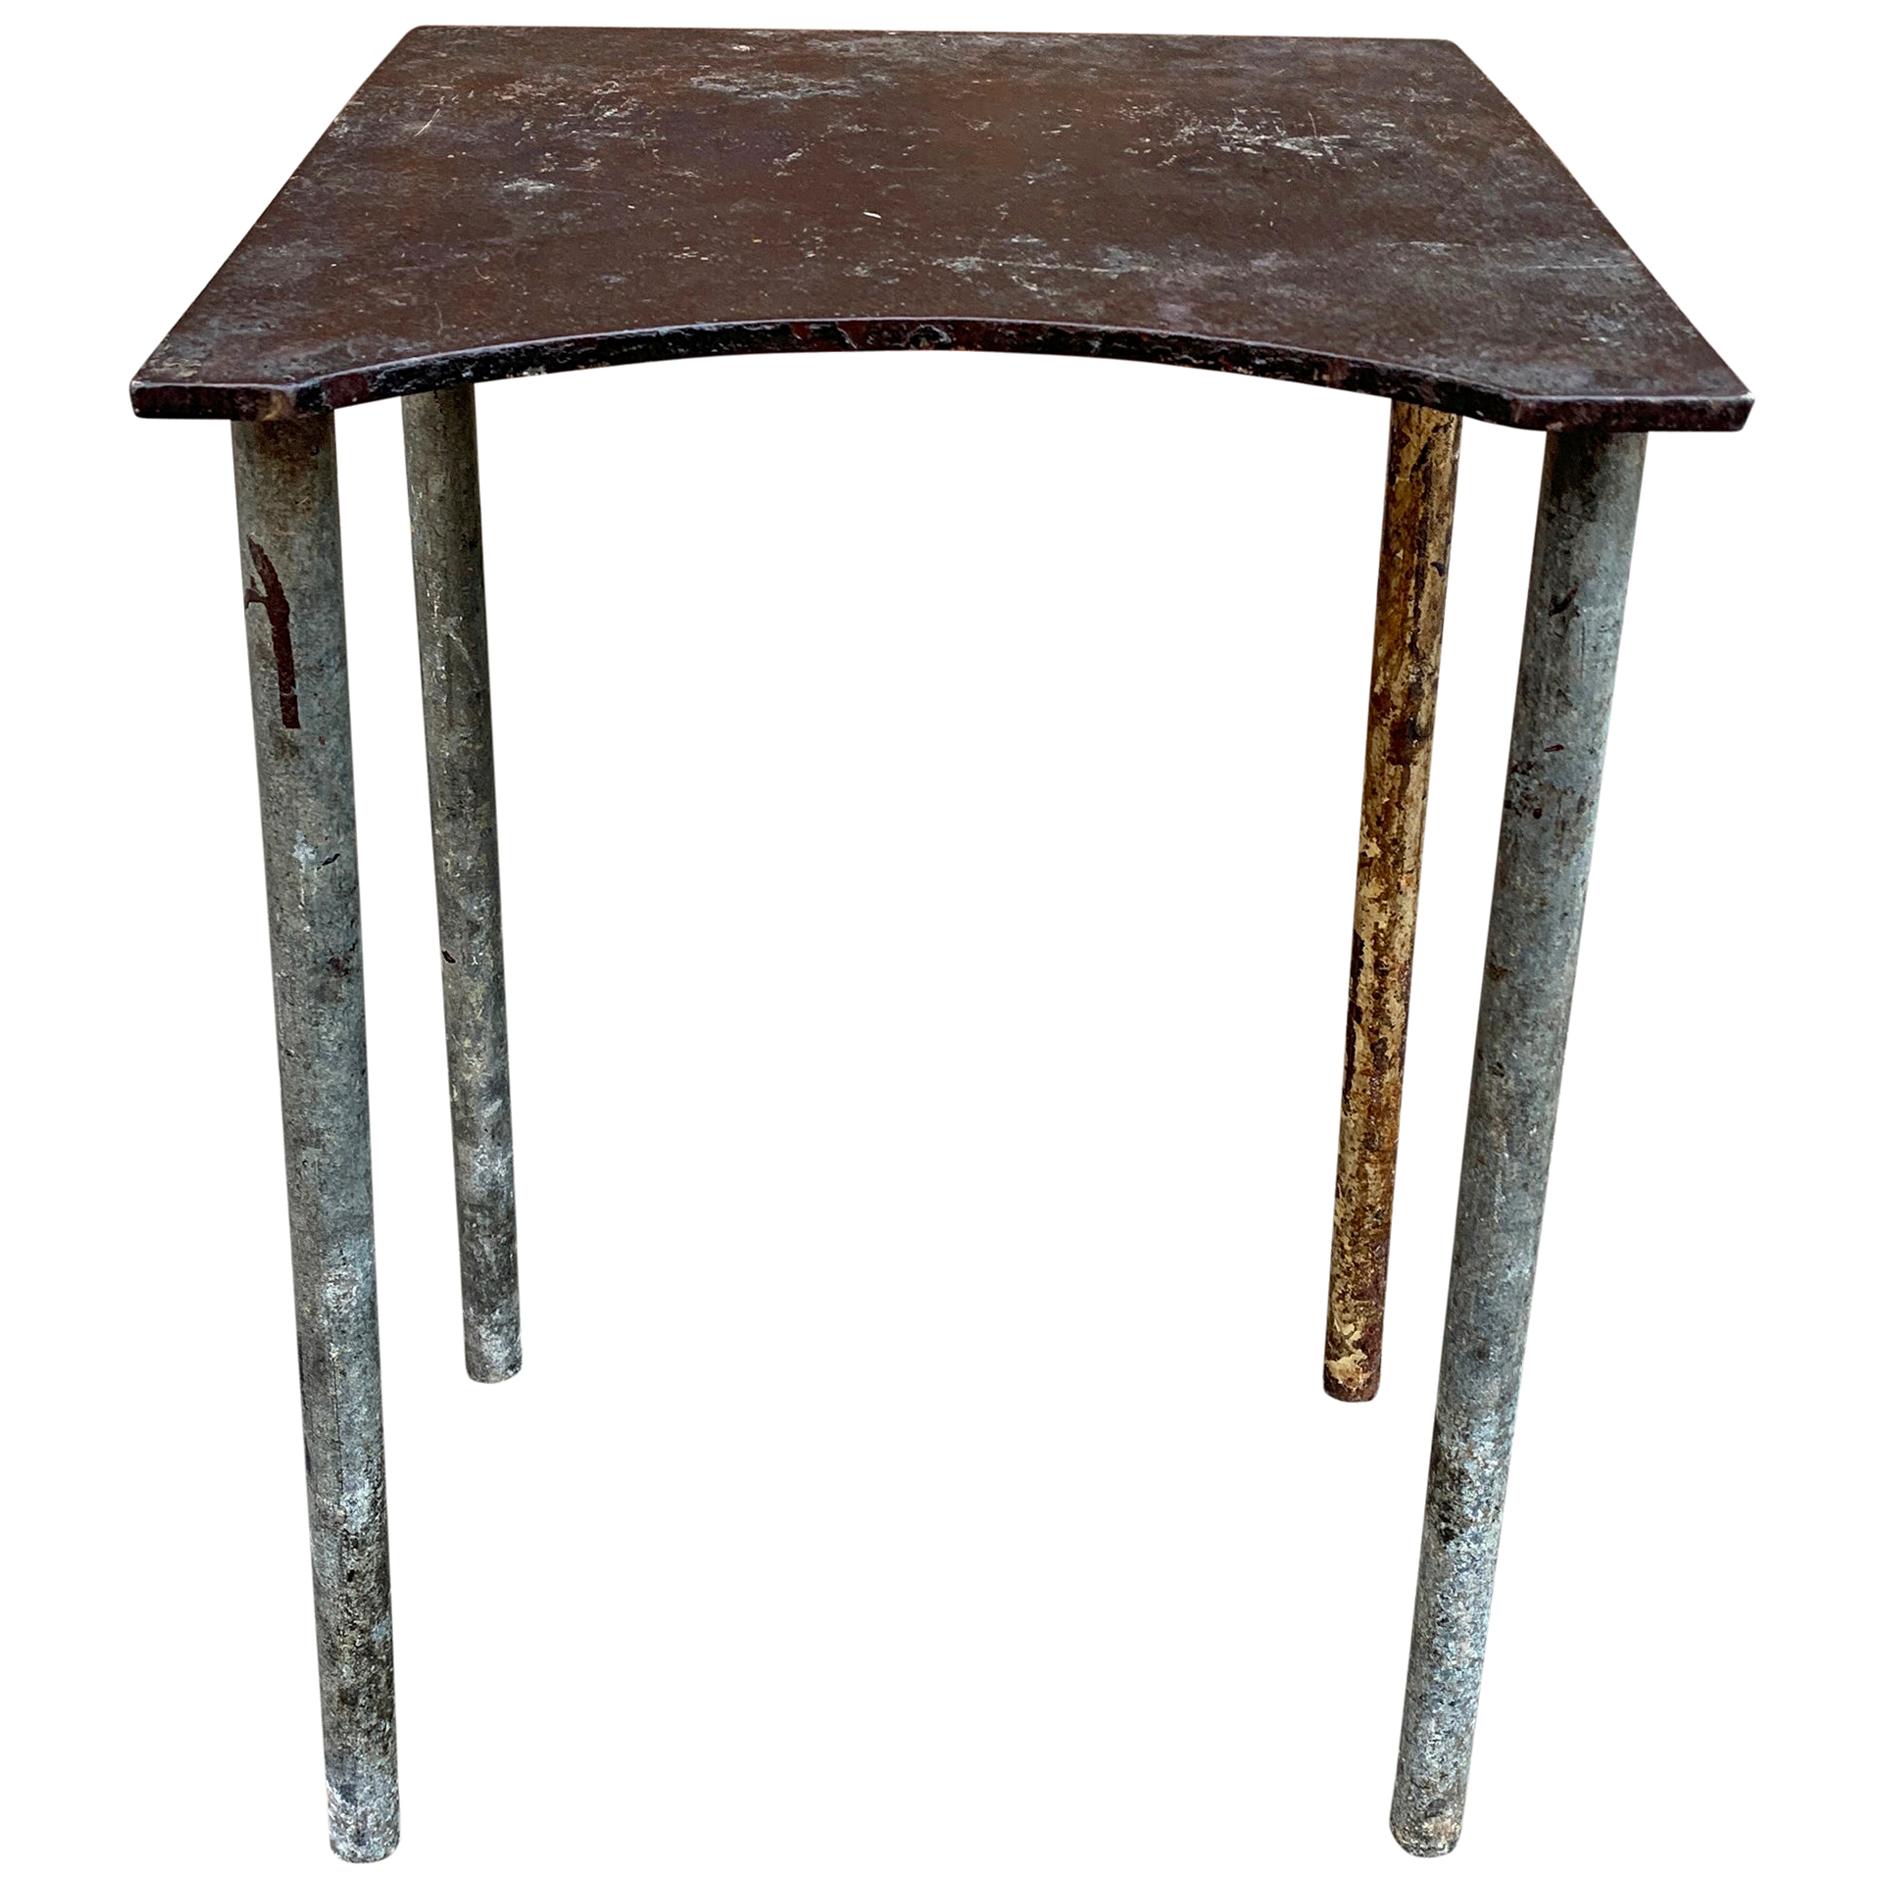 Mid-20th Century American Industrial Table